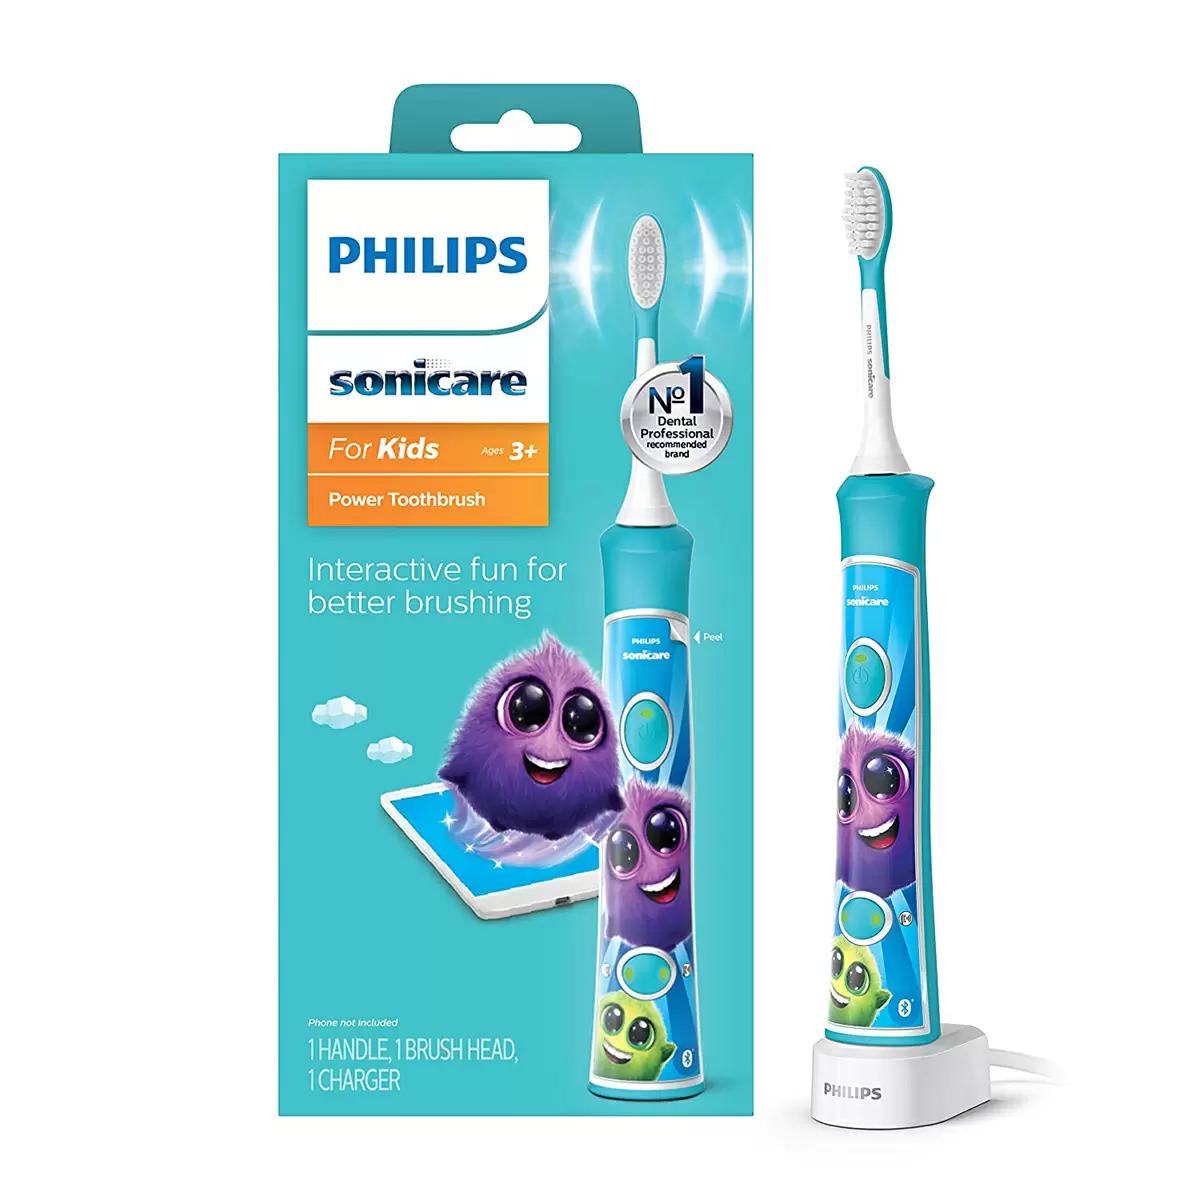 Philips Sonicare Kids Bluetooth Rechargeable Electric Toothbrush for $29.96 Shipped